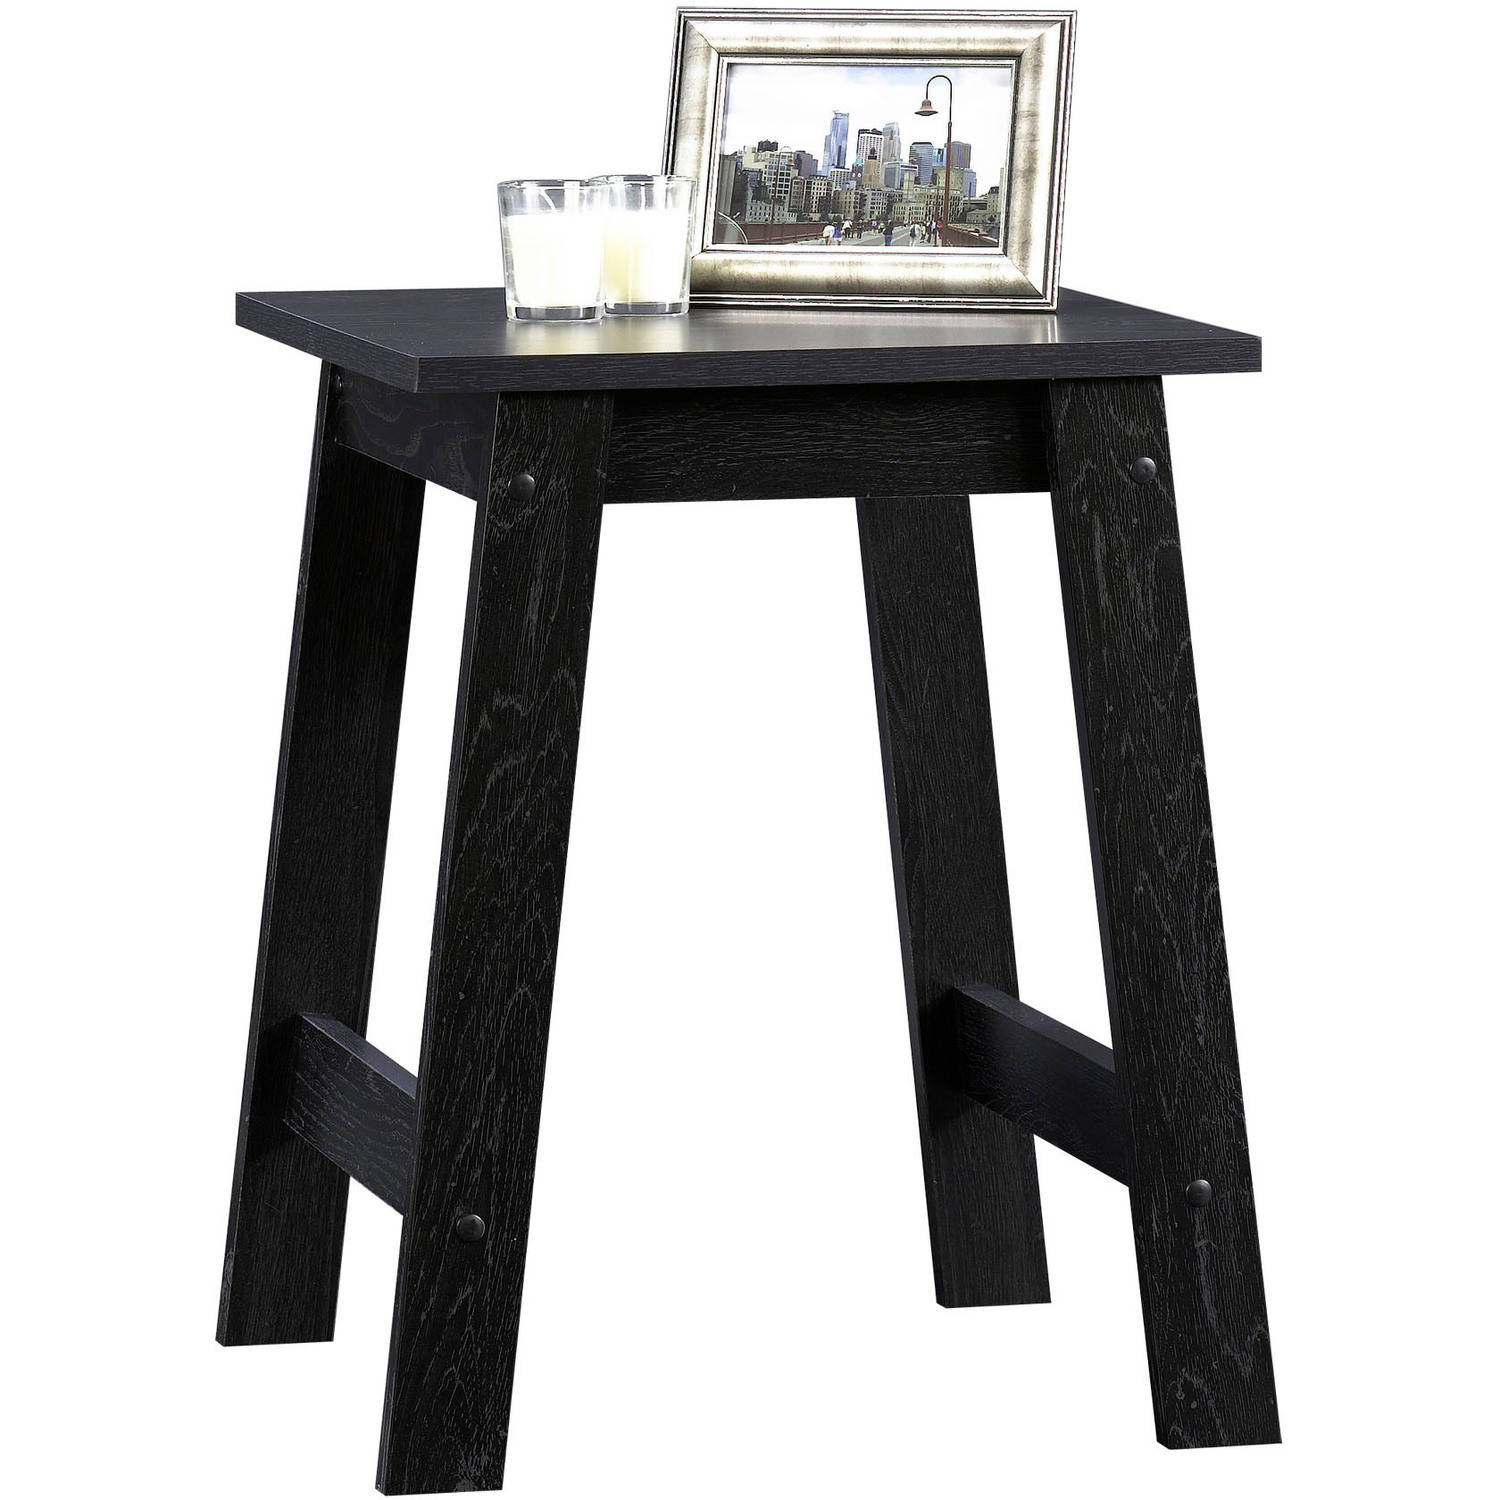 Sauder Beginnings Collection Side Table, Black - image 1 of 1